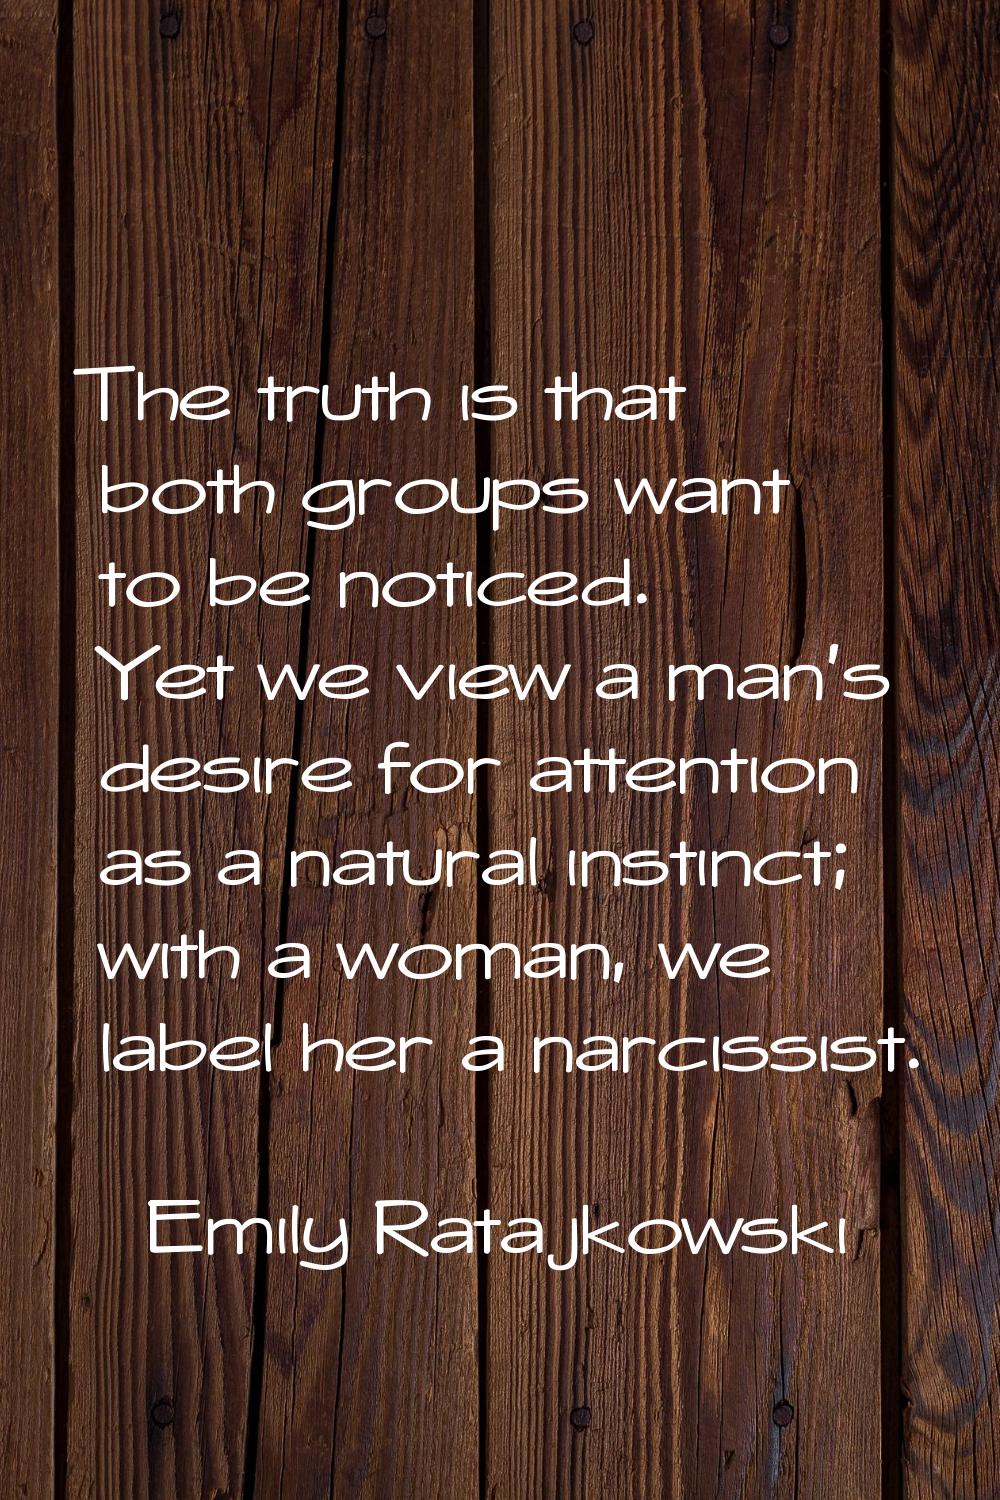 The truth is that both groups want to be noticed. Yet we view a man's desire for attention as a nat